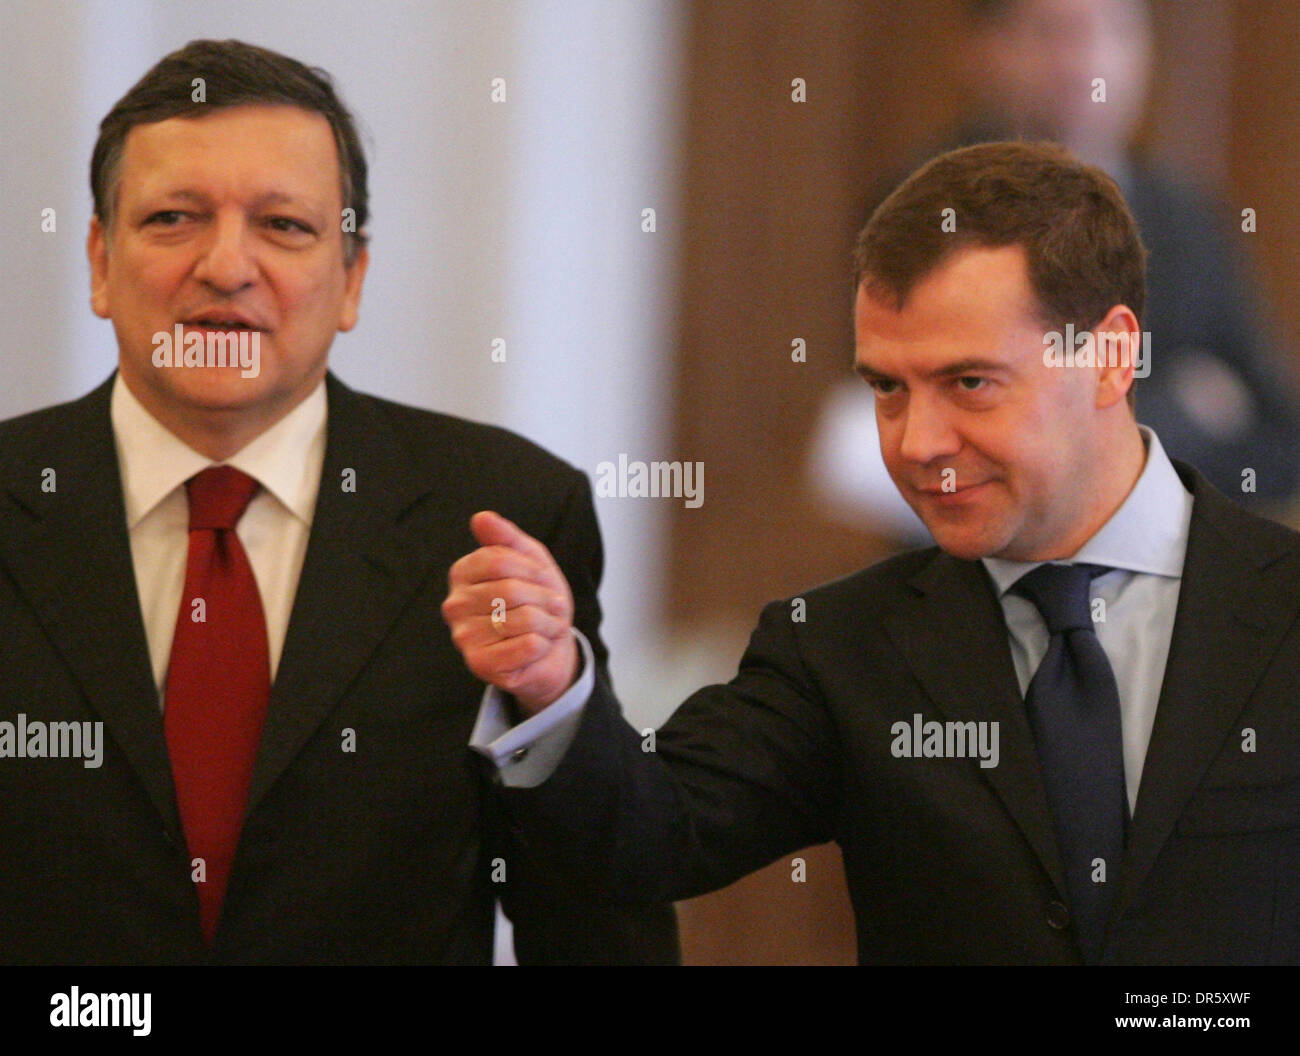 Feb 06, 2009 - Moscow, Russia - President of the European Commission JOSE MANUEL BARROSO (L) at the meeting with DMITRY MEDVEDEV, President of Russia in Kremlin, Moscow. (Credit Image: © PhotoXpress/ZUMA Press) RESTRICTIONS: * North and South America Rights Only * Stock Photo